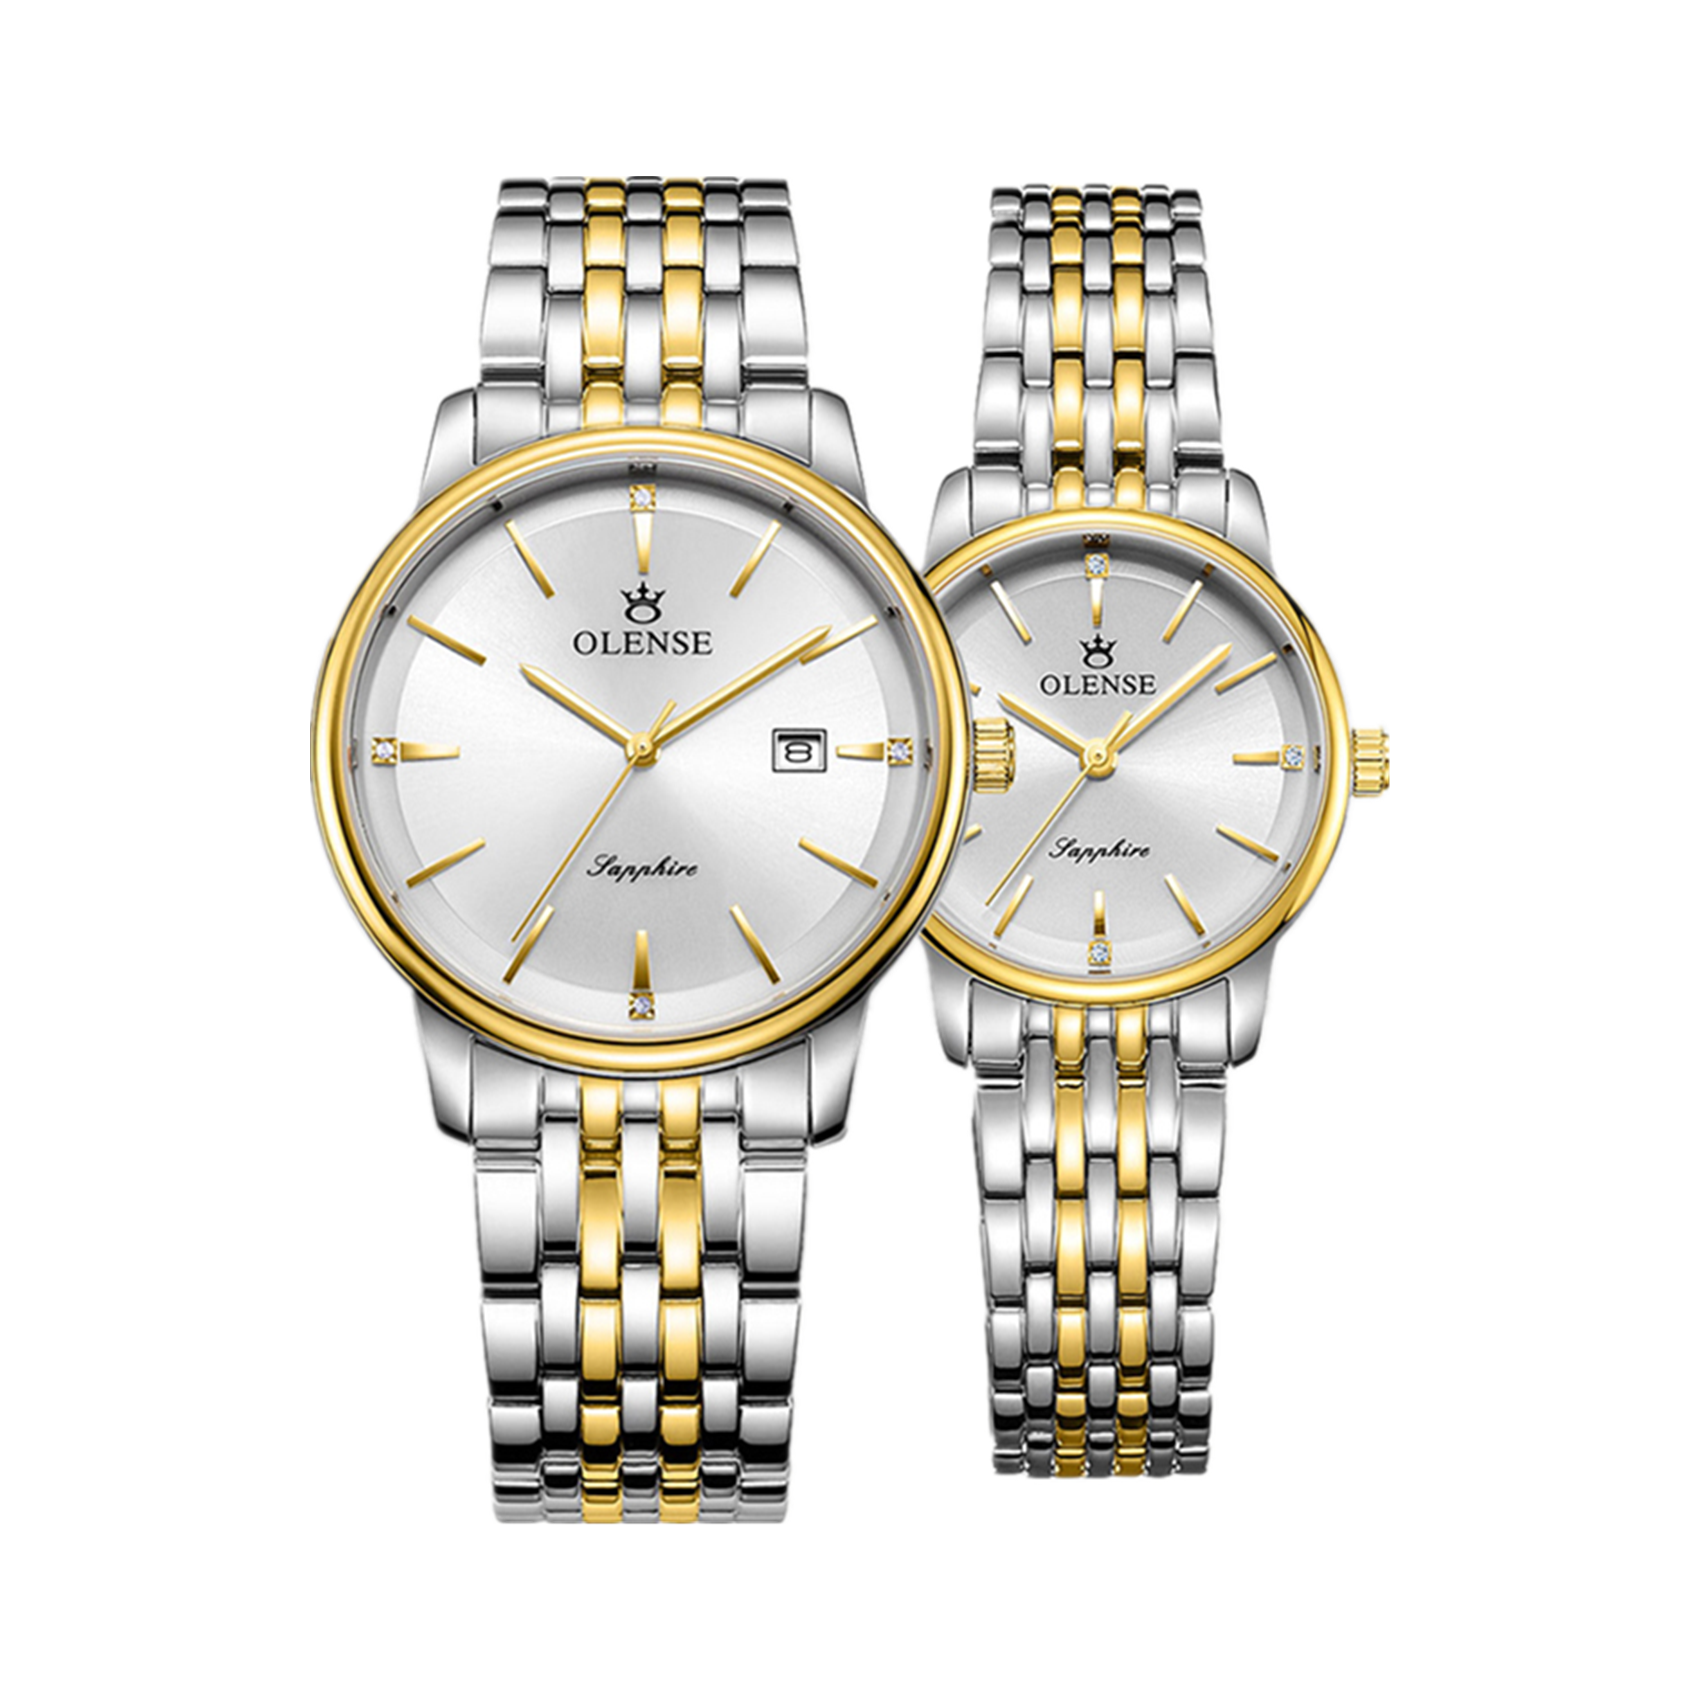 OLENSE - Gold Couple Watch, His & Her Sets, Automatic Quartz, Lover Gift